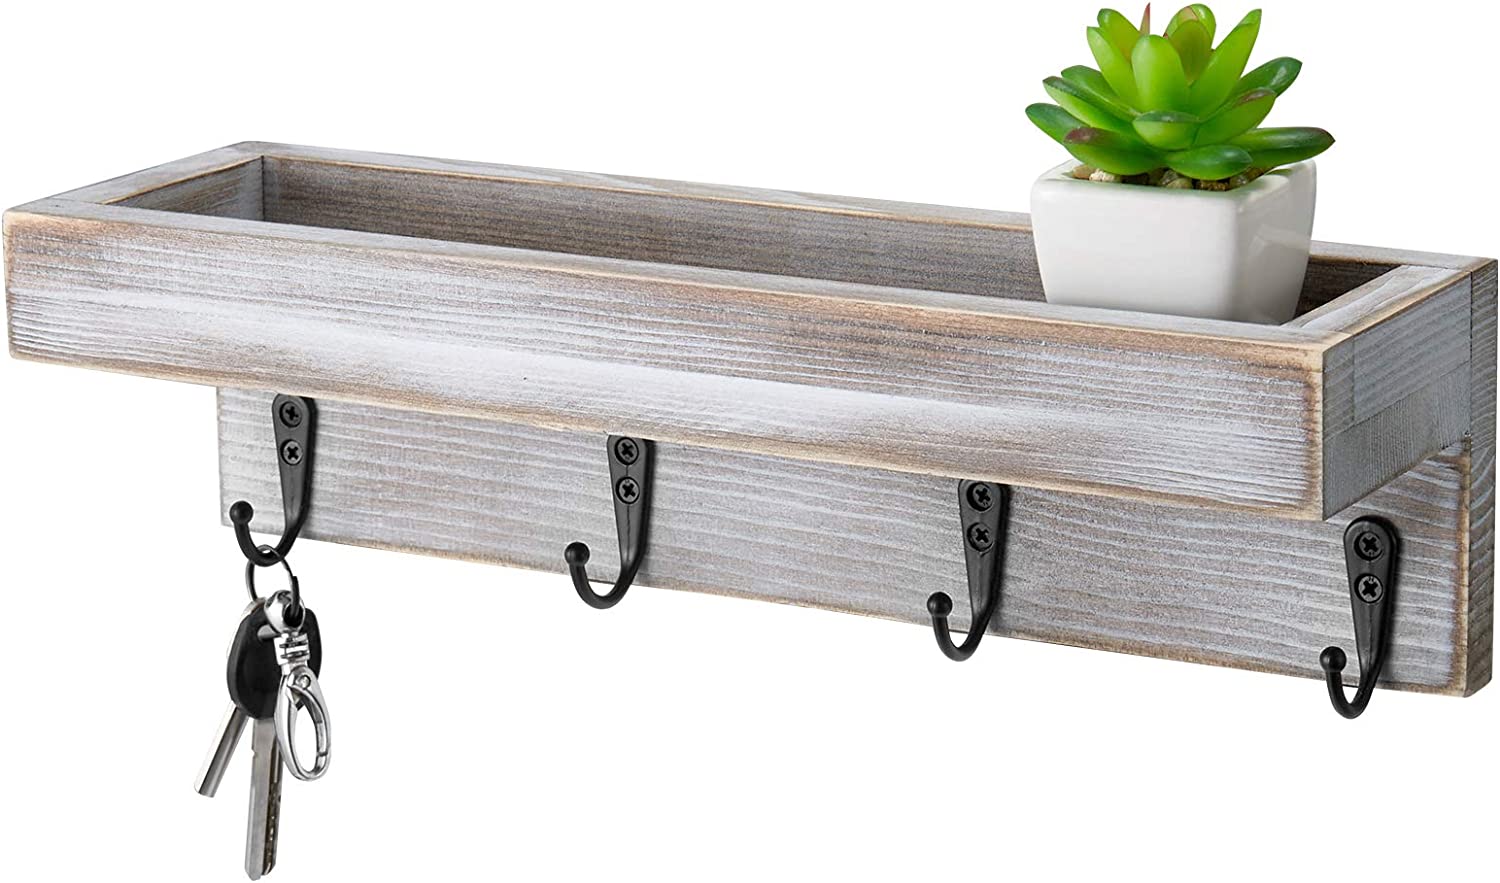 Sageme Rustic Finish Pine Wood Key Holder For The Wall